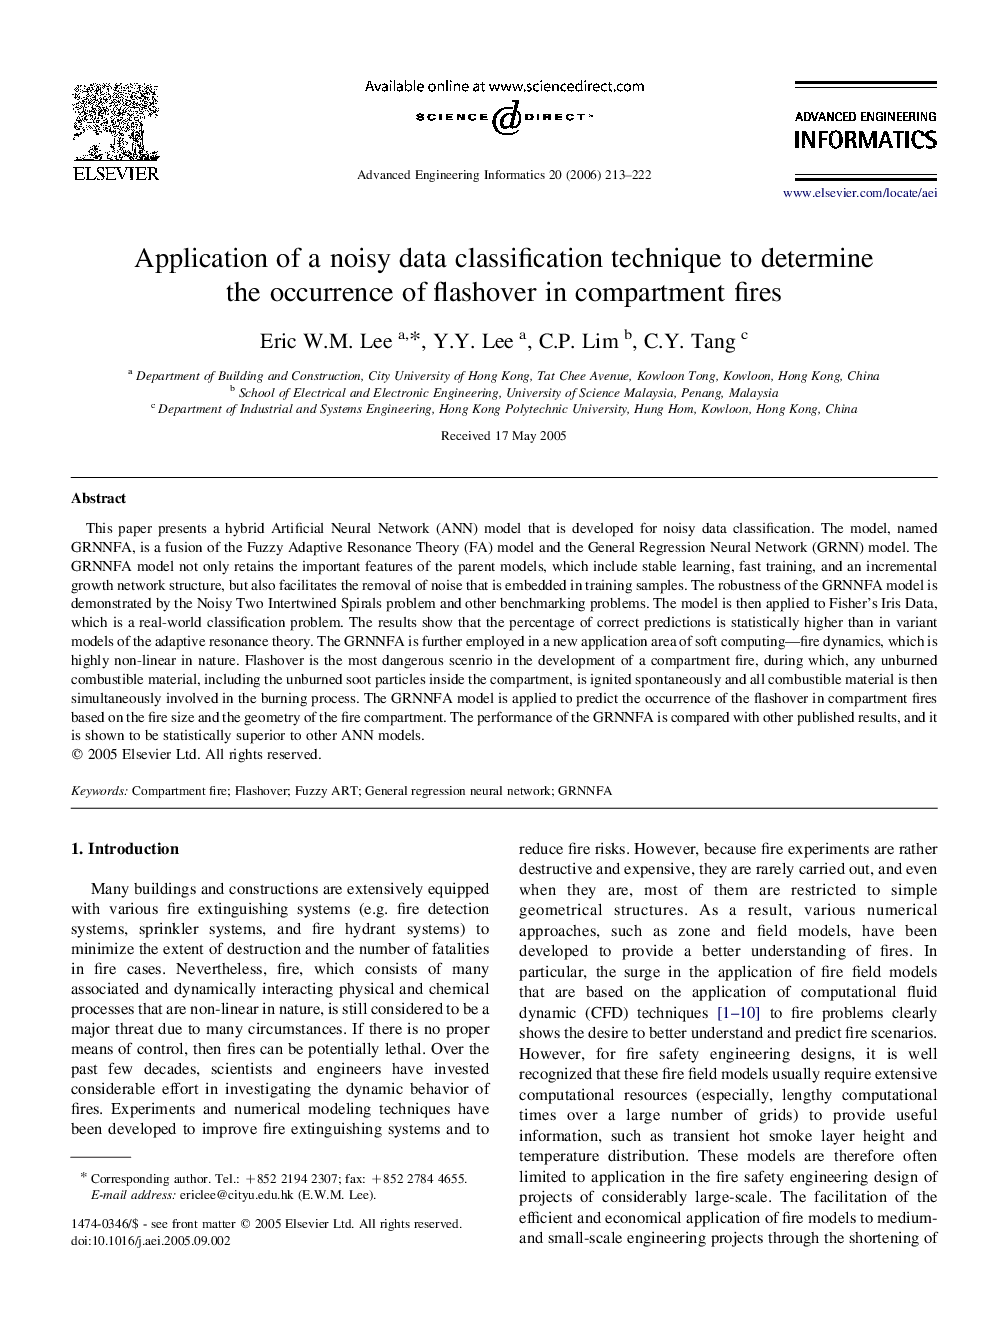 Application of a noisy data classification technique to determine the occurrence of flashover in compartment fires